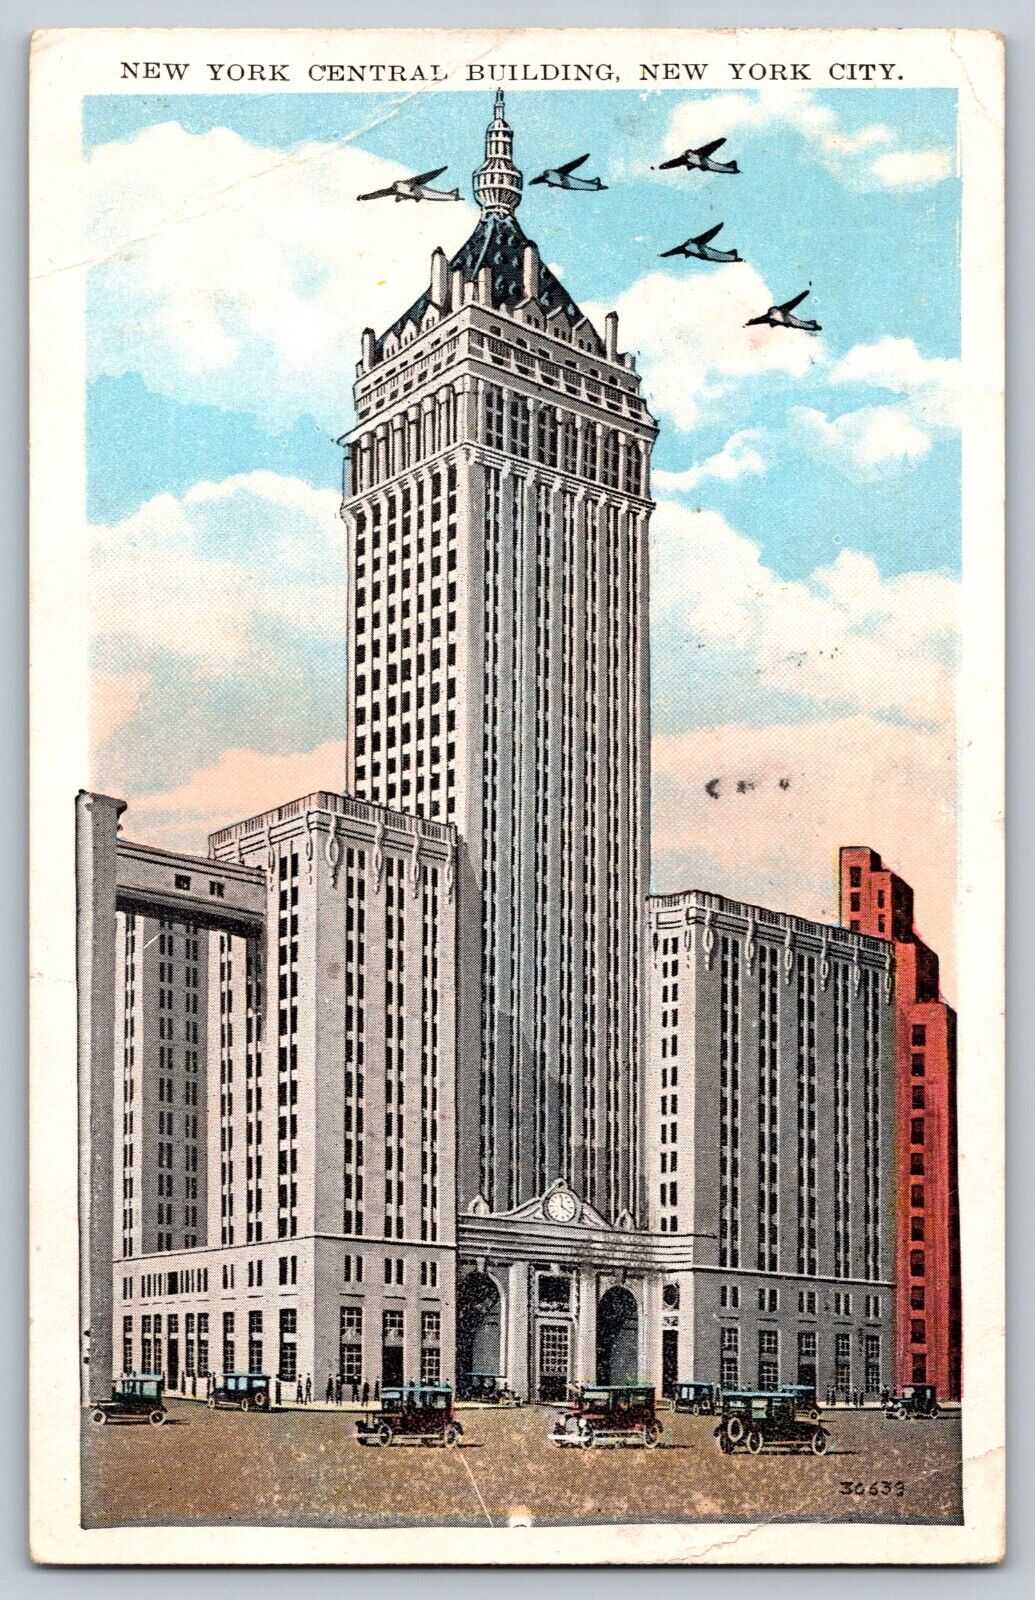 New York Central Building - New York City / 1940s Linen Postcard / Unposted